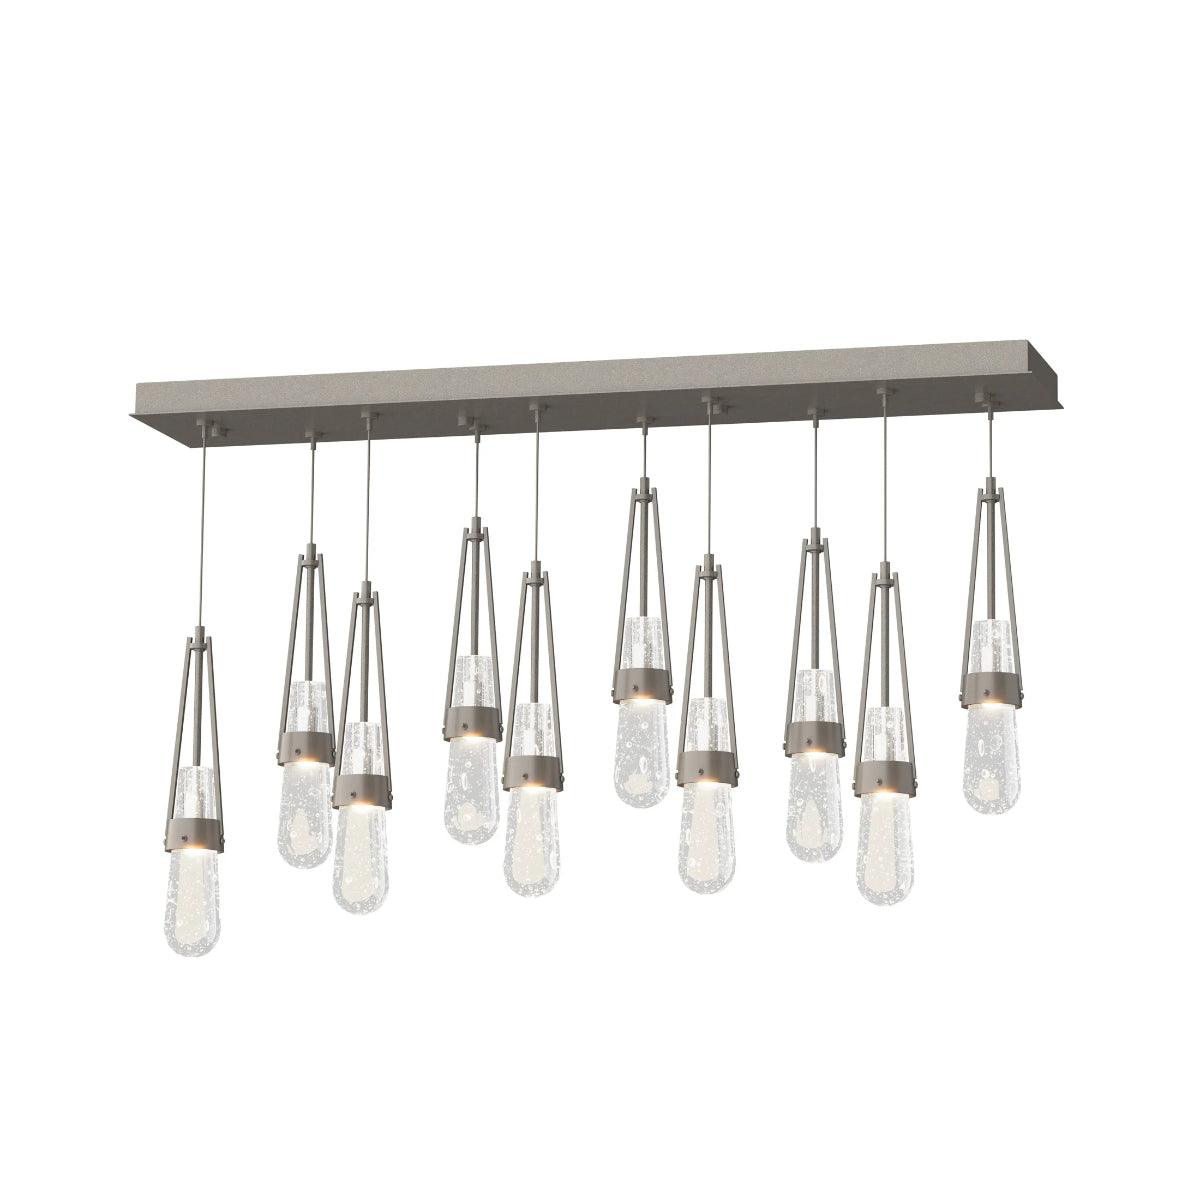 Link 45 in. 10 Lights Linear Pendant Light with Standard Height Blown Glass